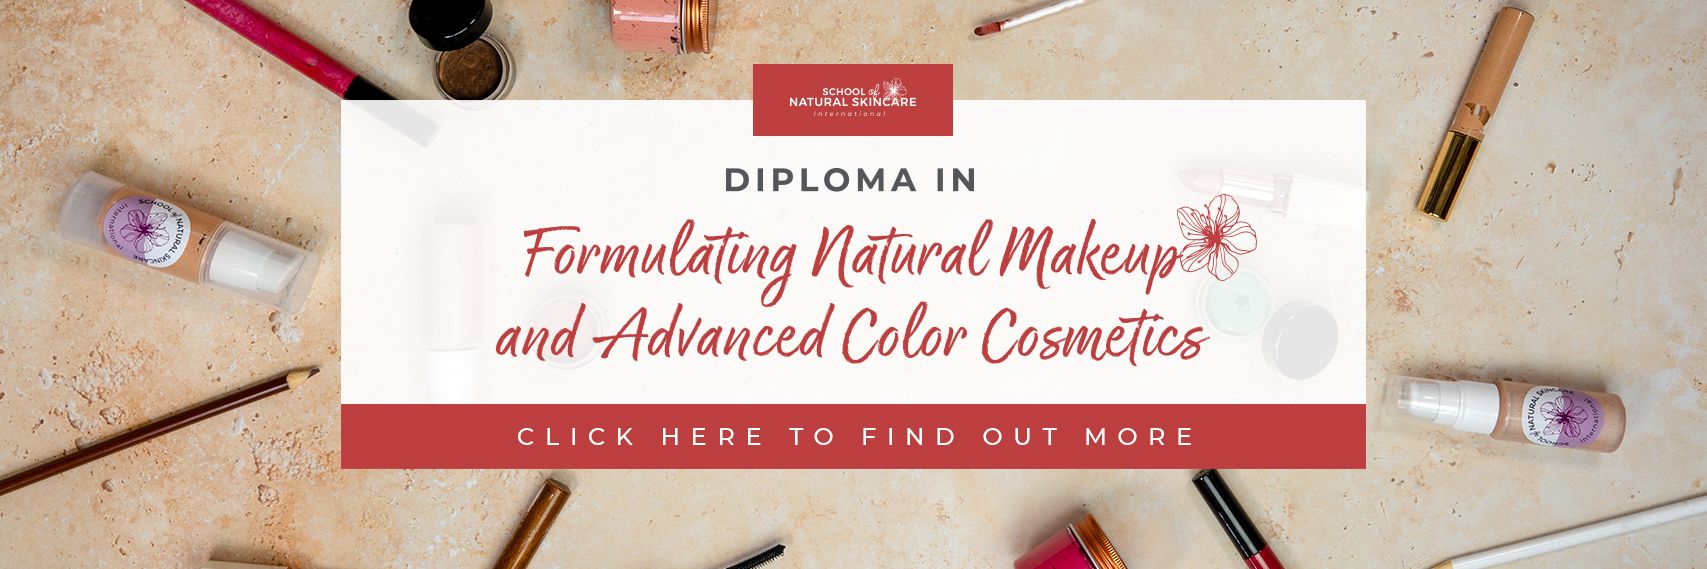 Beyond Mineral Makeup: All the Natural Color Cosmetics You Can Make Makeup Formulation 